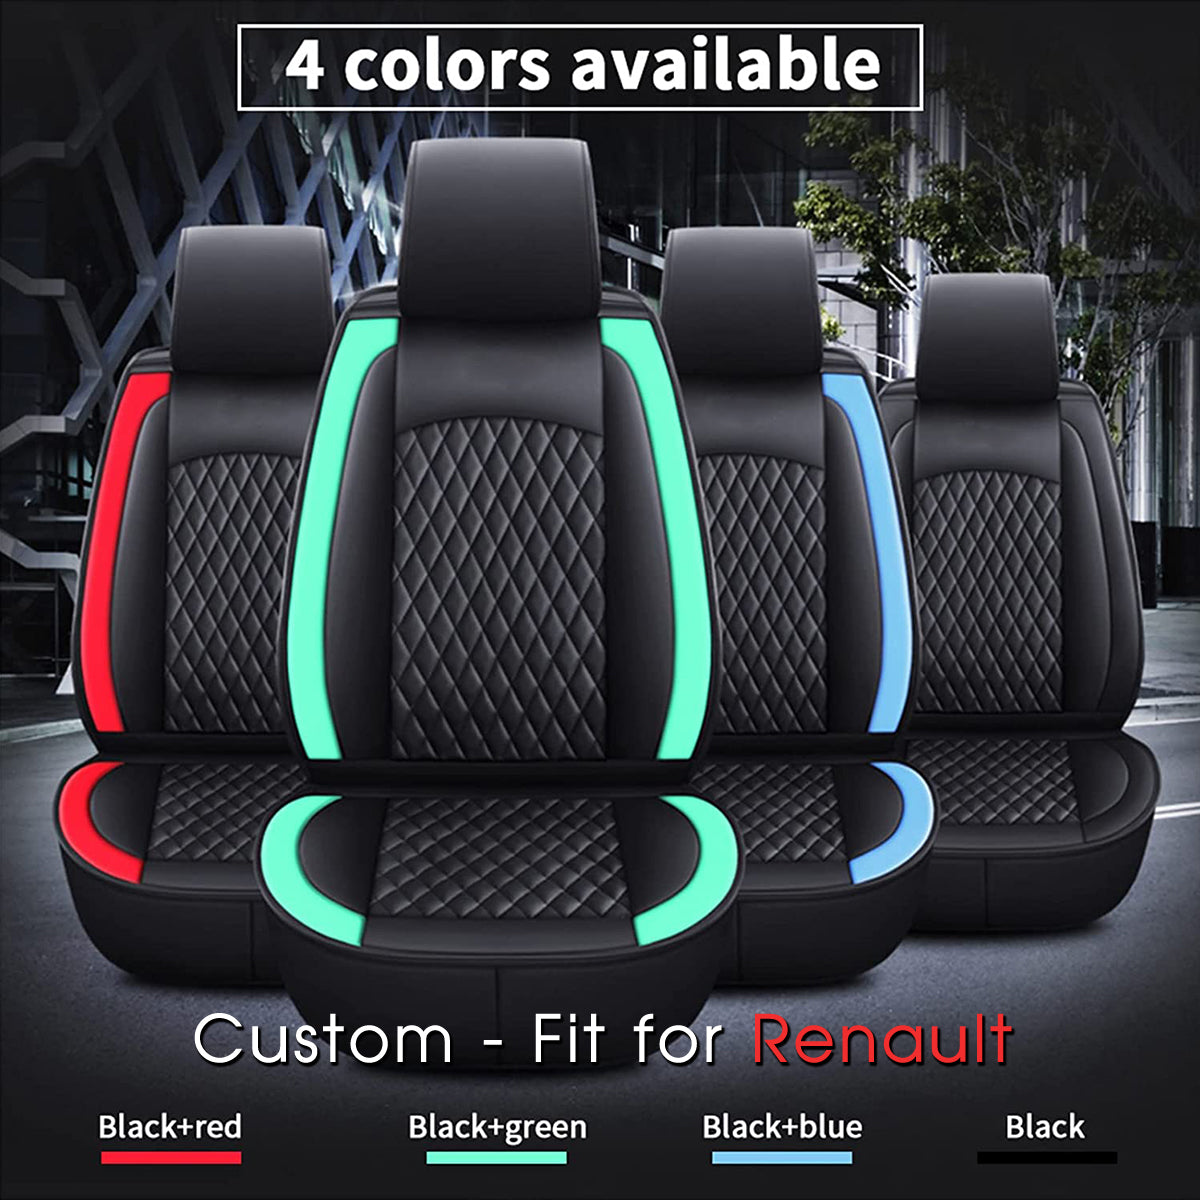 2 Car Seat Covers Full Set, Custom-Fit For Car, Waterproof Leather Front Rear Seat Automotive Protection Cushions, Car Accessories DLSA2111